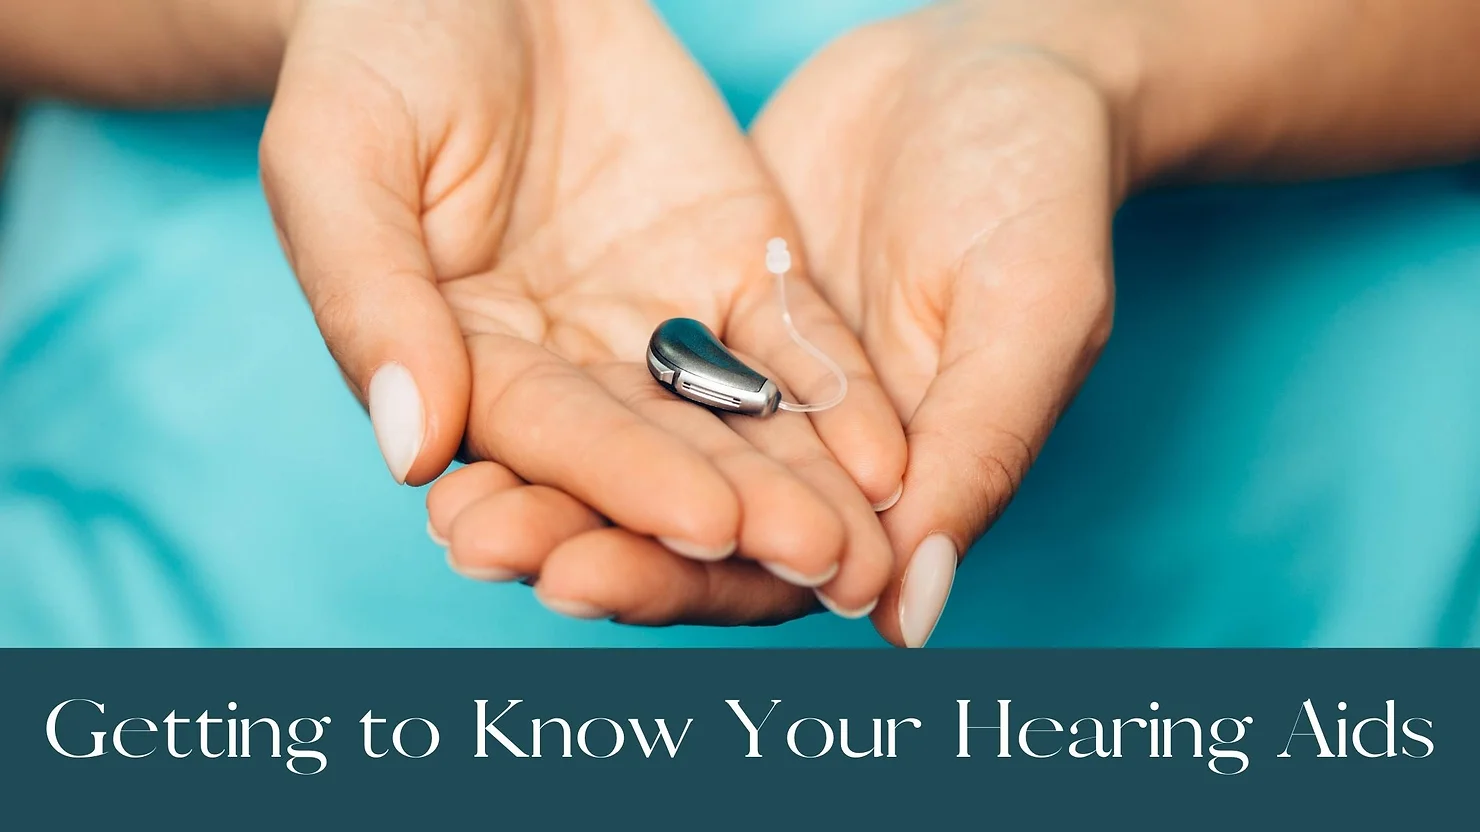 Featured image for “Getting to Know Your Hearing Aids”